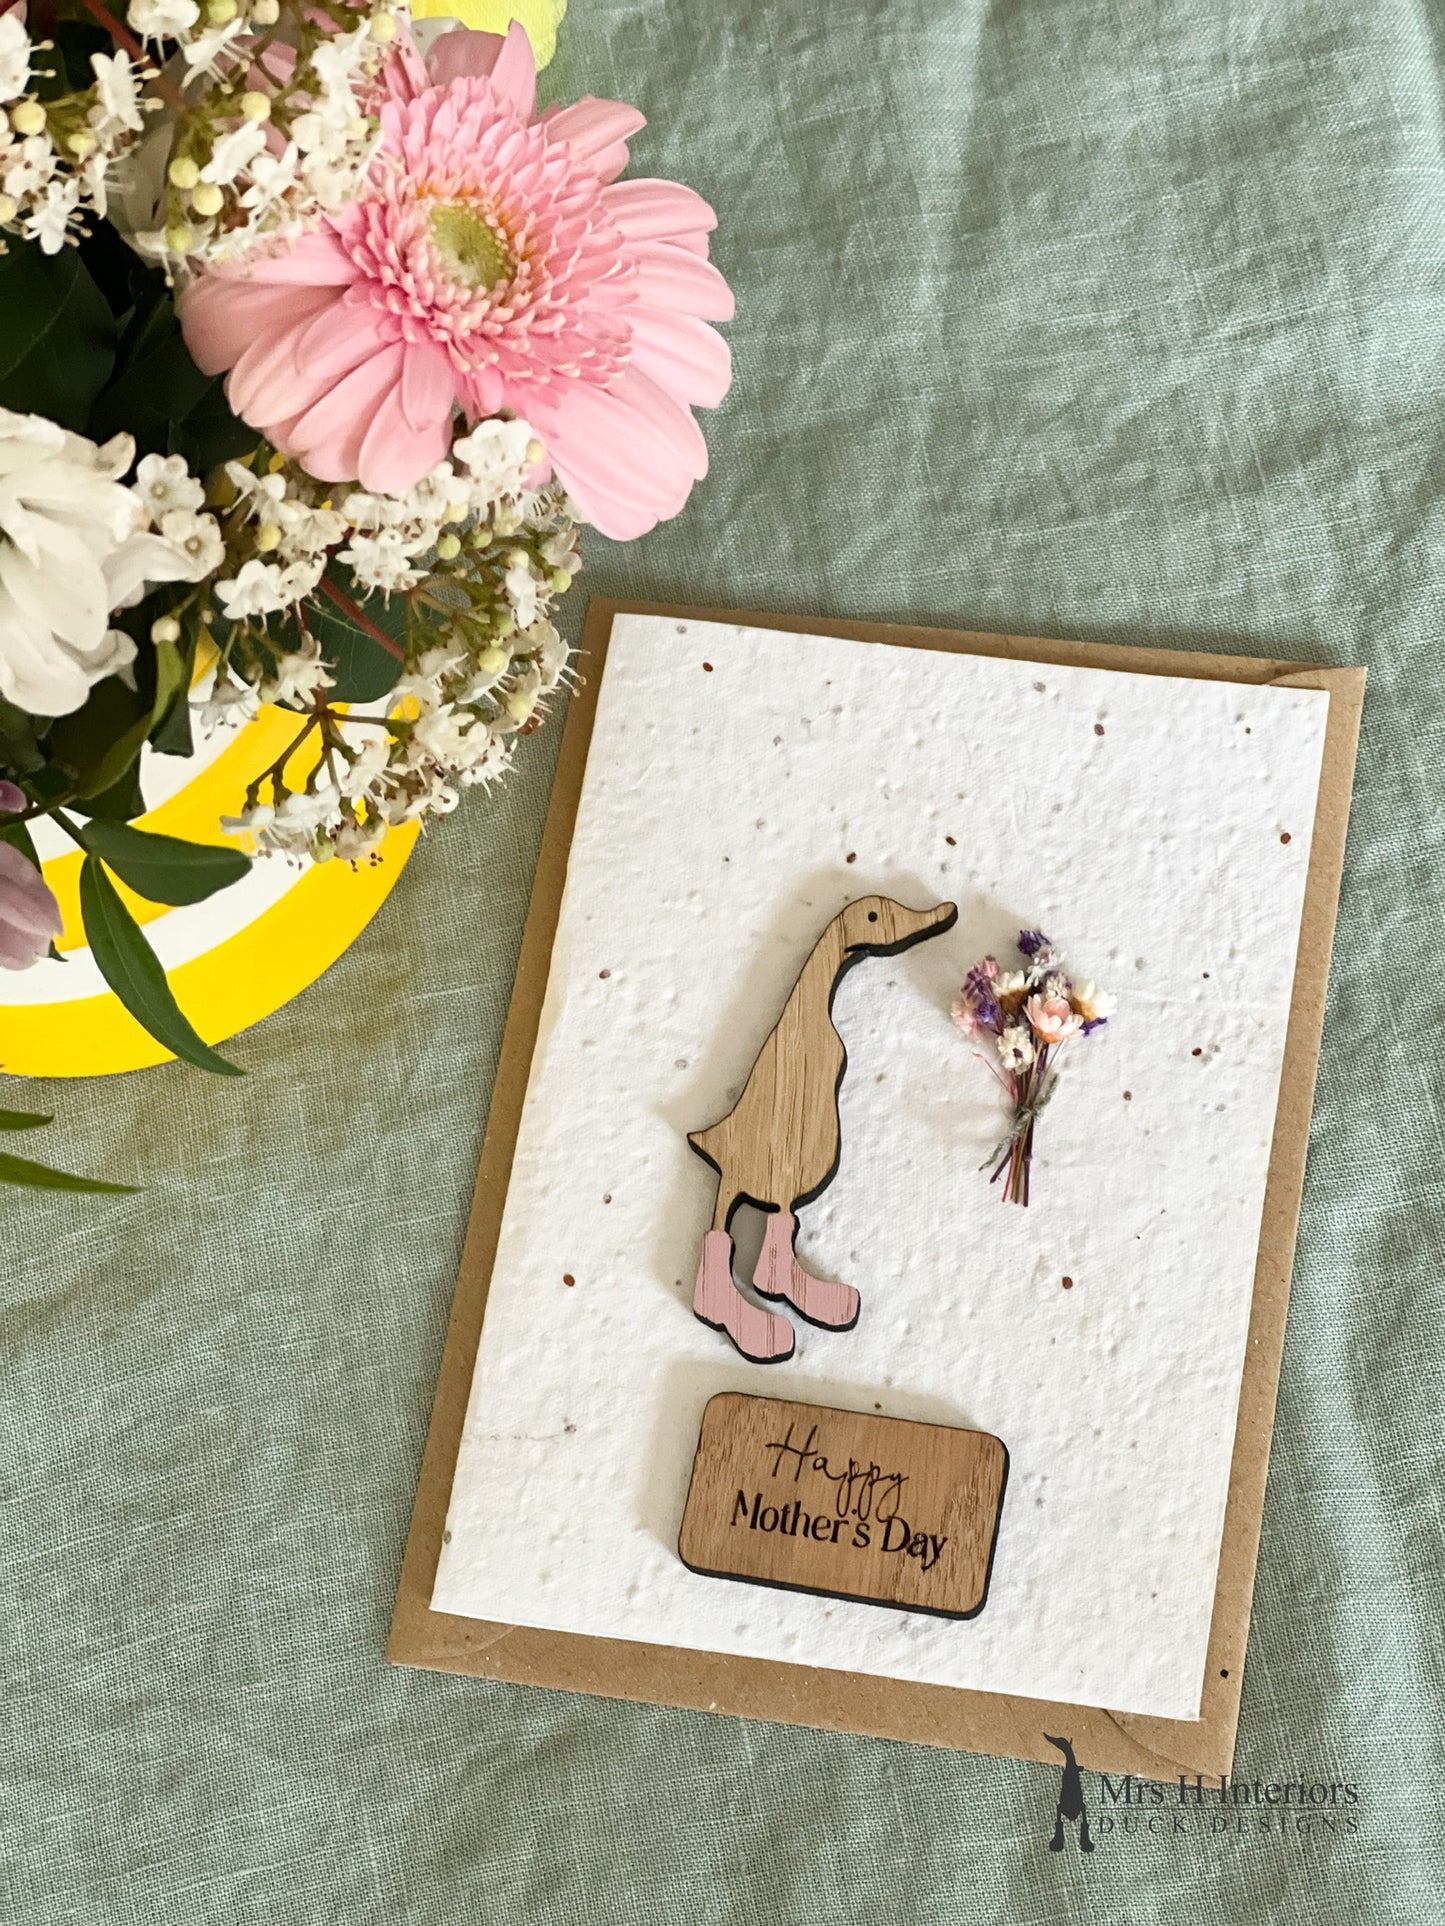 Happy Mother's Day - Duck with Flowers - Mother's Day Card - Decorated Wooden Duck in Boots by Mrs H the Duck Lady